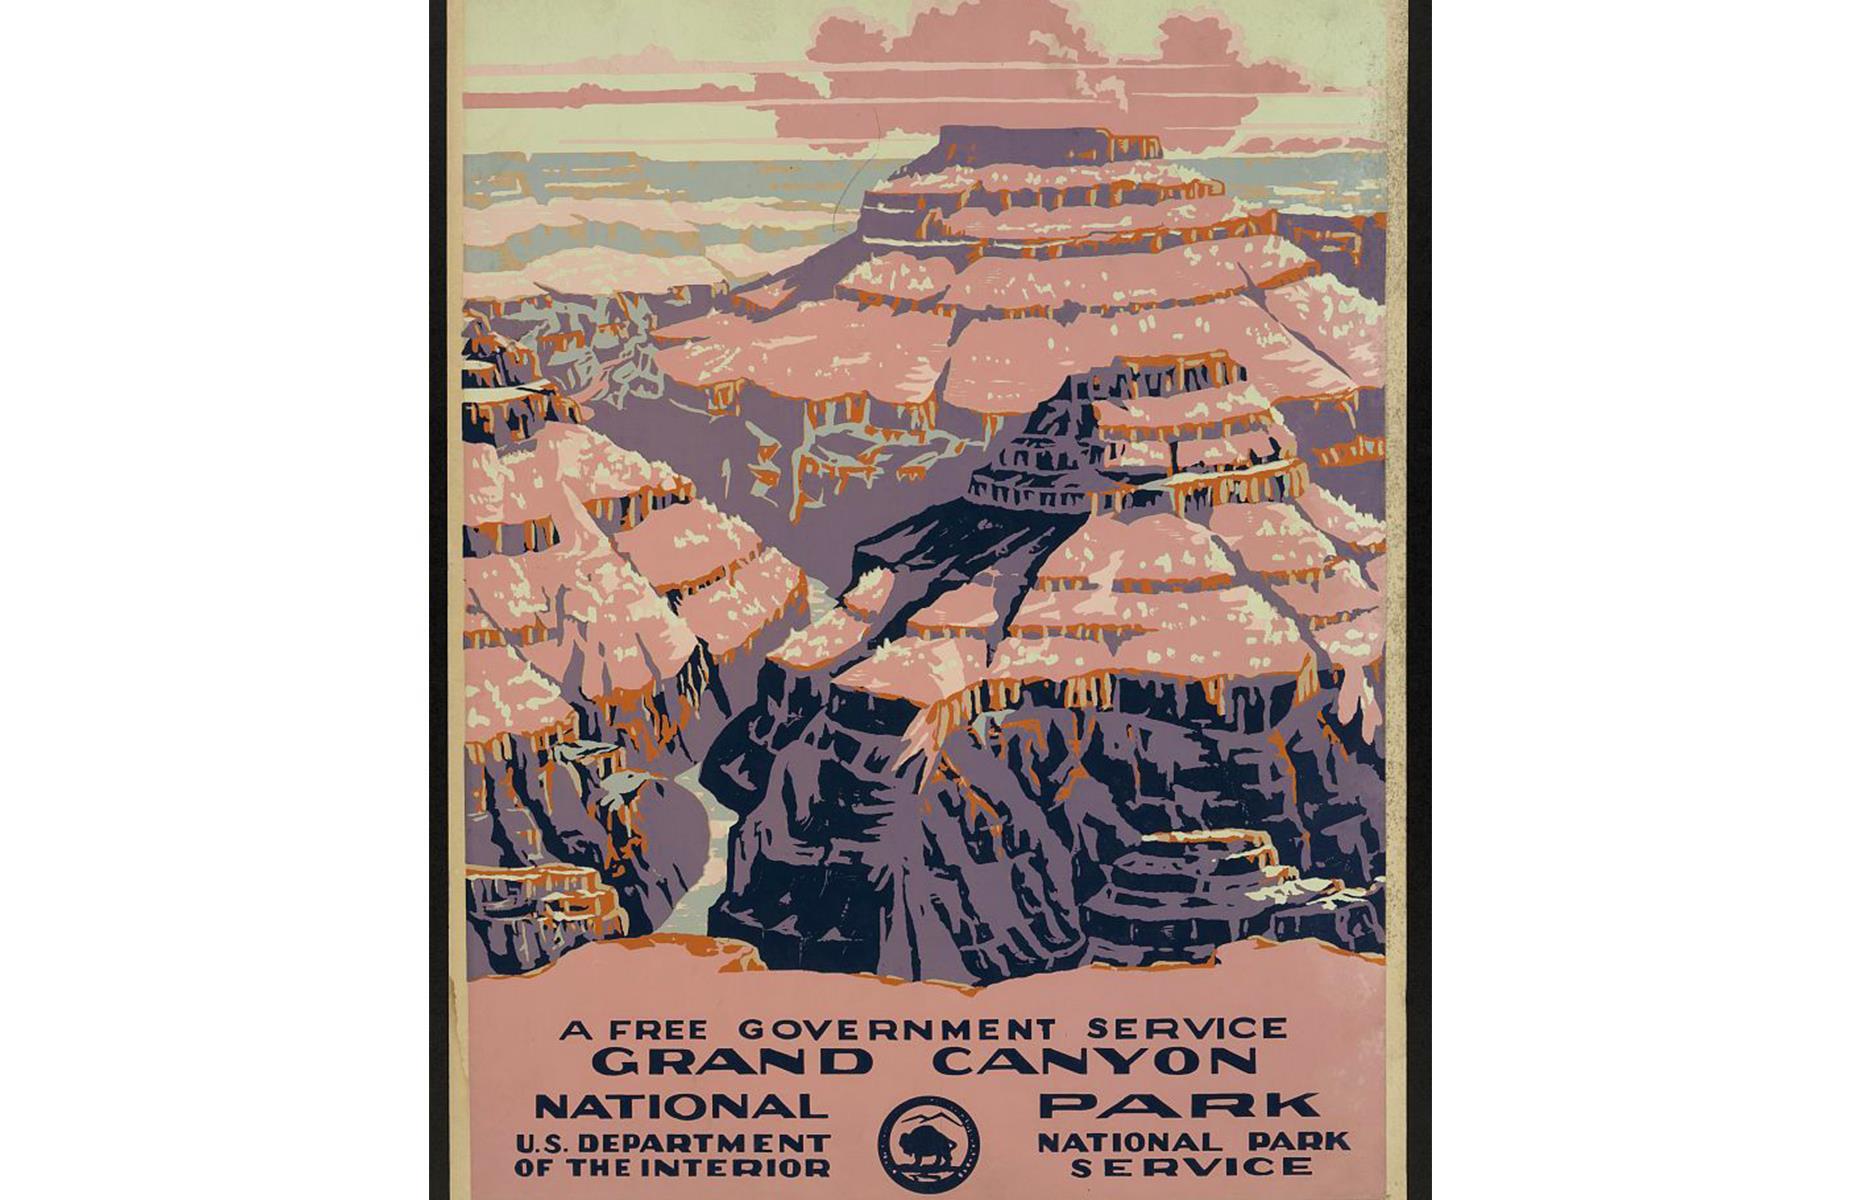 <p>The mighty Grand Canyon could easily do without promo posters – the drama of those burnt red rocks sells itself. But this advert from the National Park Service and the US Department of the Interior is captivating nonetheless. The poster dates to the 1930s and shows the canyon's Mars-like landscape capped by clouds. </p>  <p><a href="https://www.loveexploring.com/gallerylist/100304/40-places-you-wont-believe-are-on-earth"><strong>These 40 places look like they're on another planet</strong></a></p>